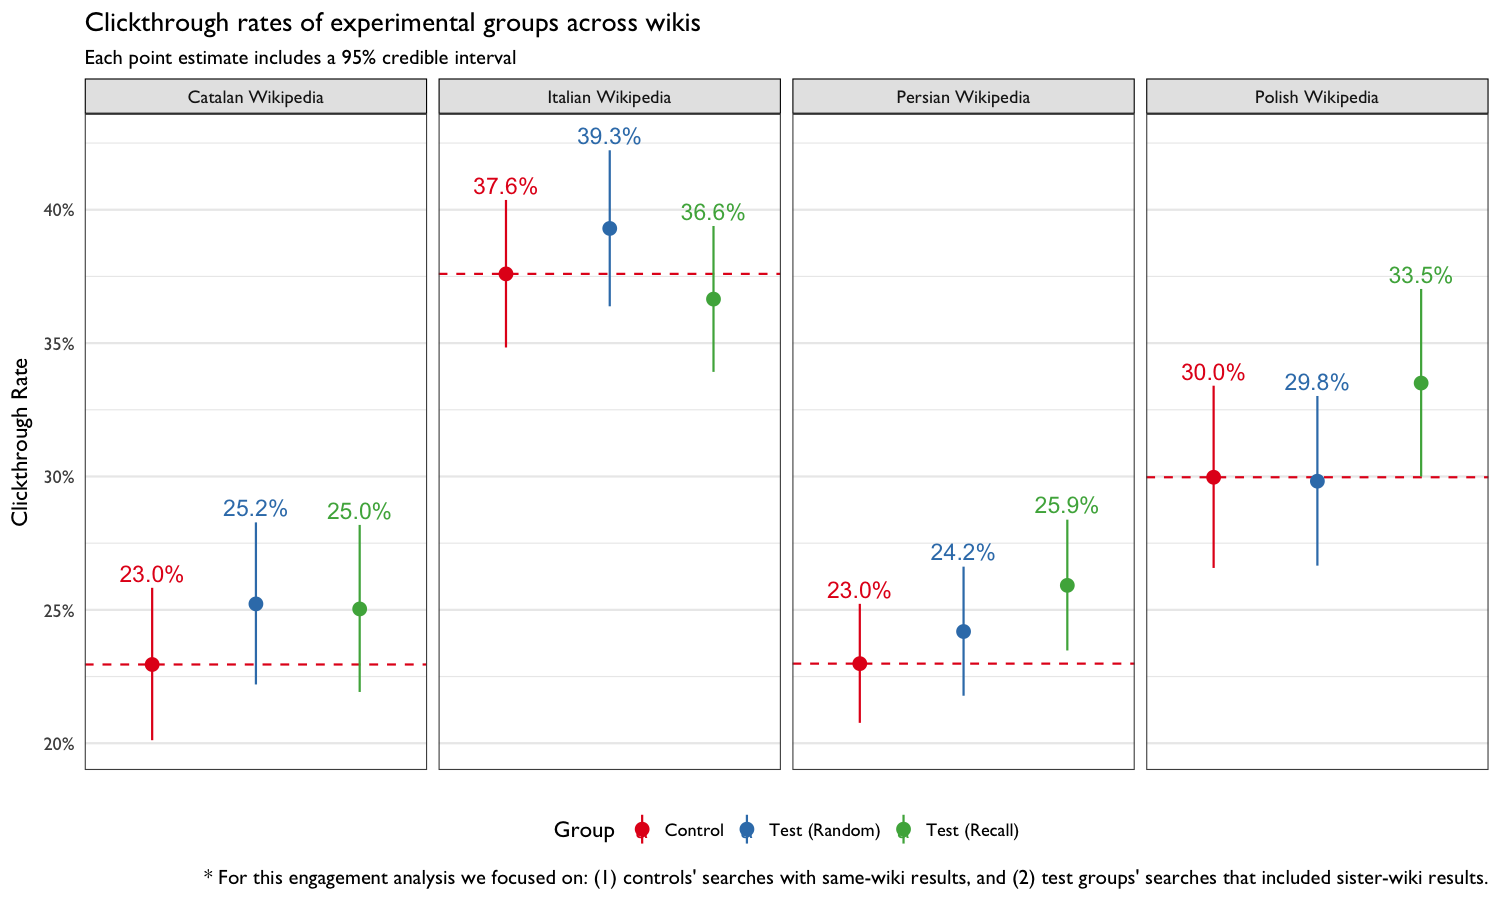 **Figure 6**: Clickthrough rates of experimental groups, split by wiki. In the <span class="test-group-1">Control</span> group, only searches that yielded some same-wiki results were considered. In the two test groups, only searches that yielded some sister-wiki results were considered.